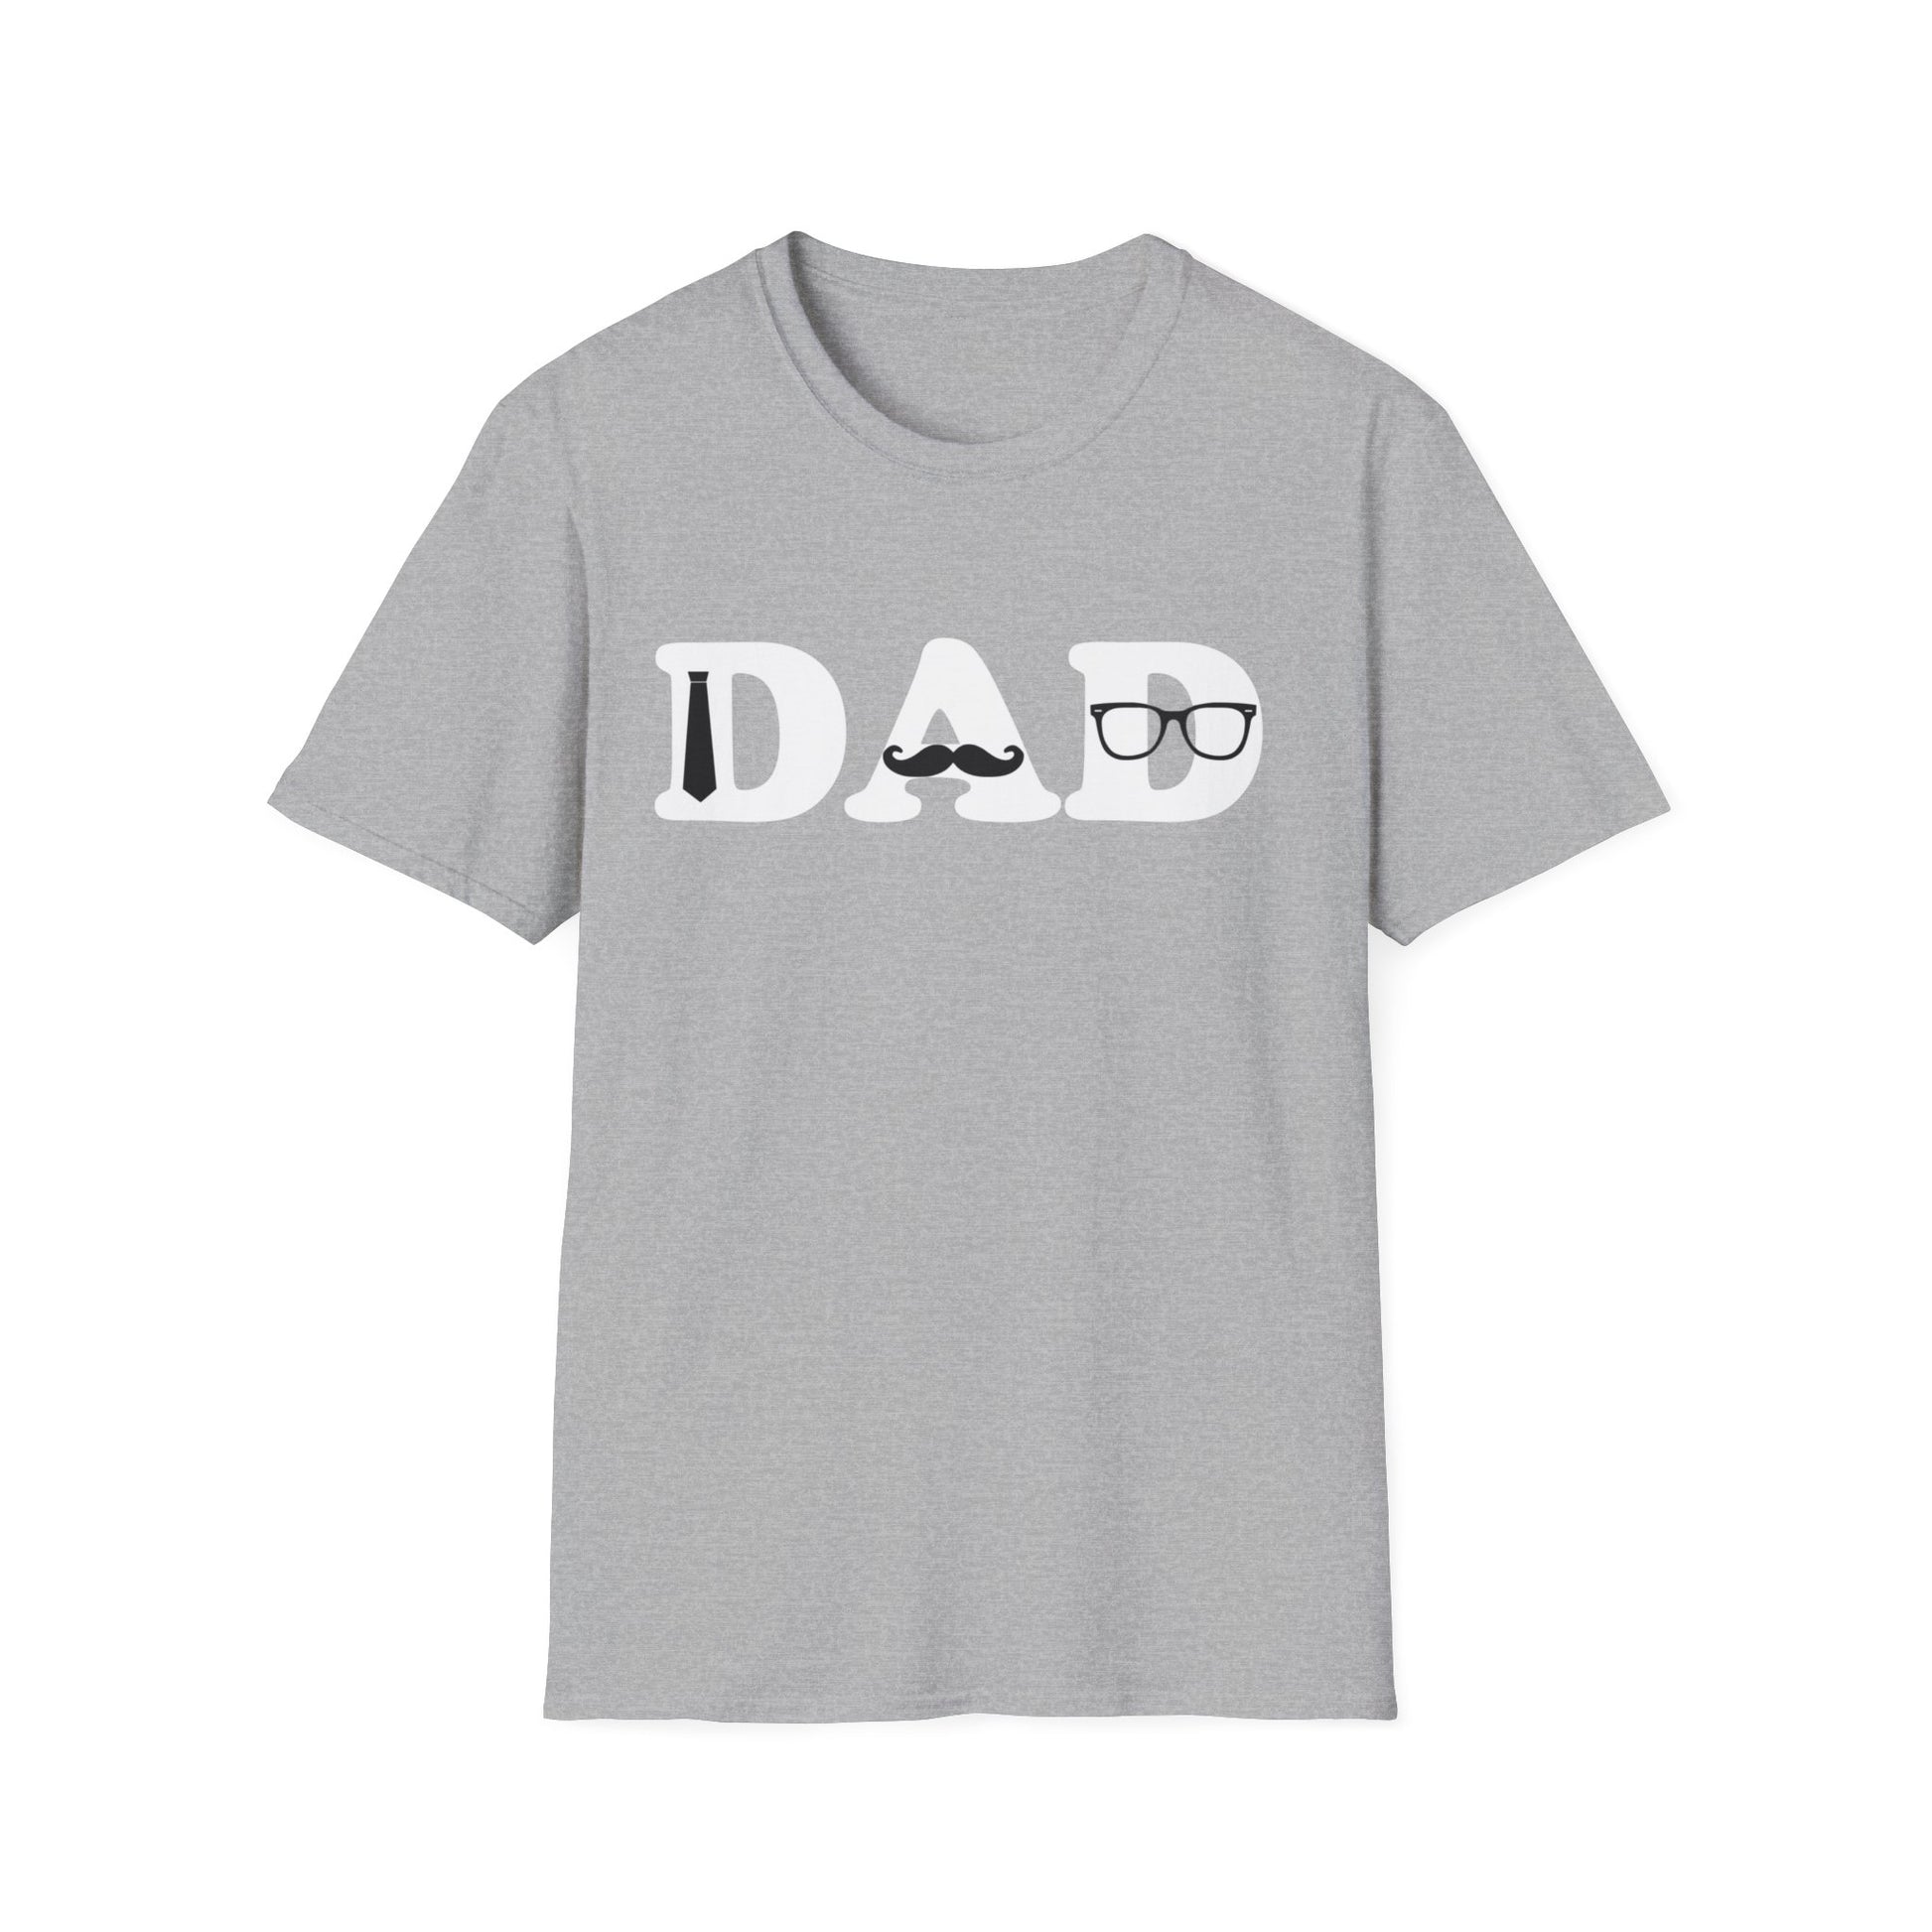 A light grey t-shirt with a design of the word Dad. On the word dad there is a black tie, moustache and glasses.